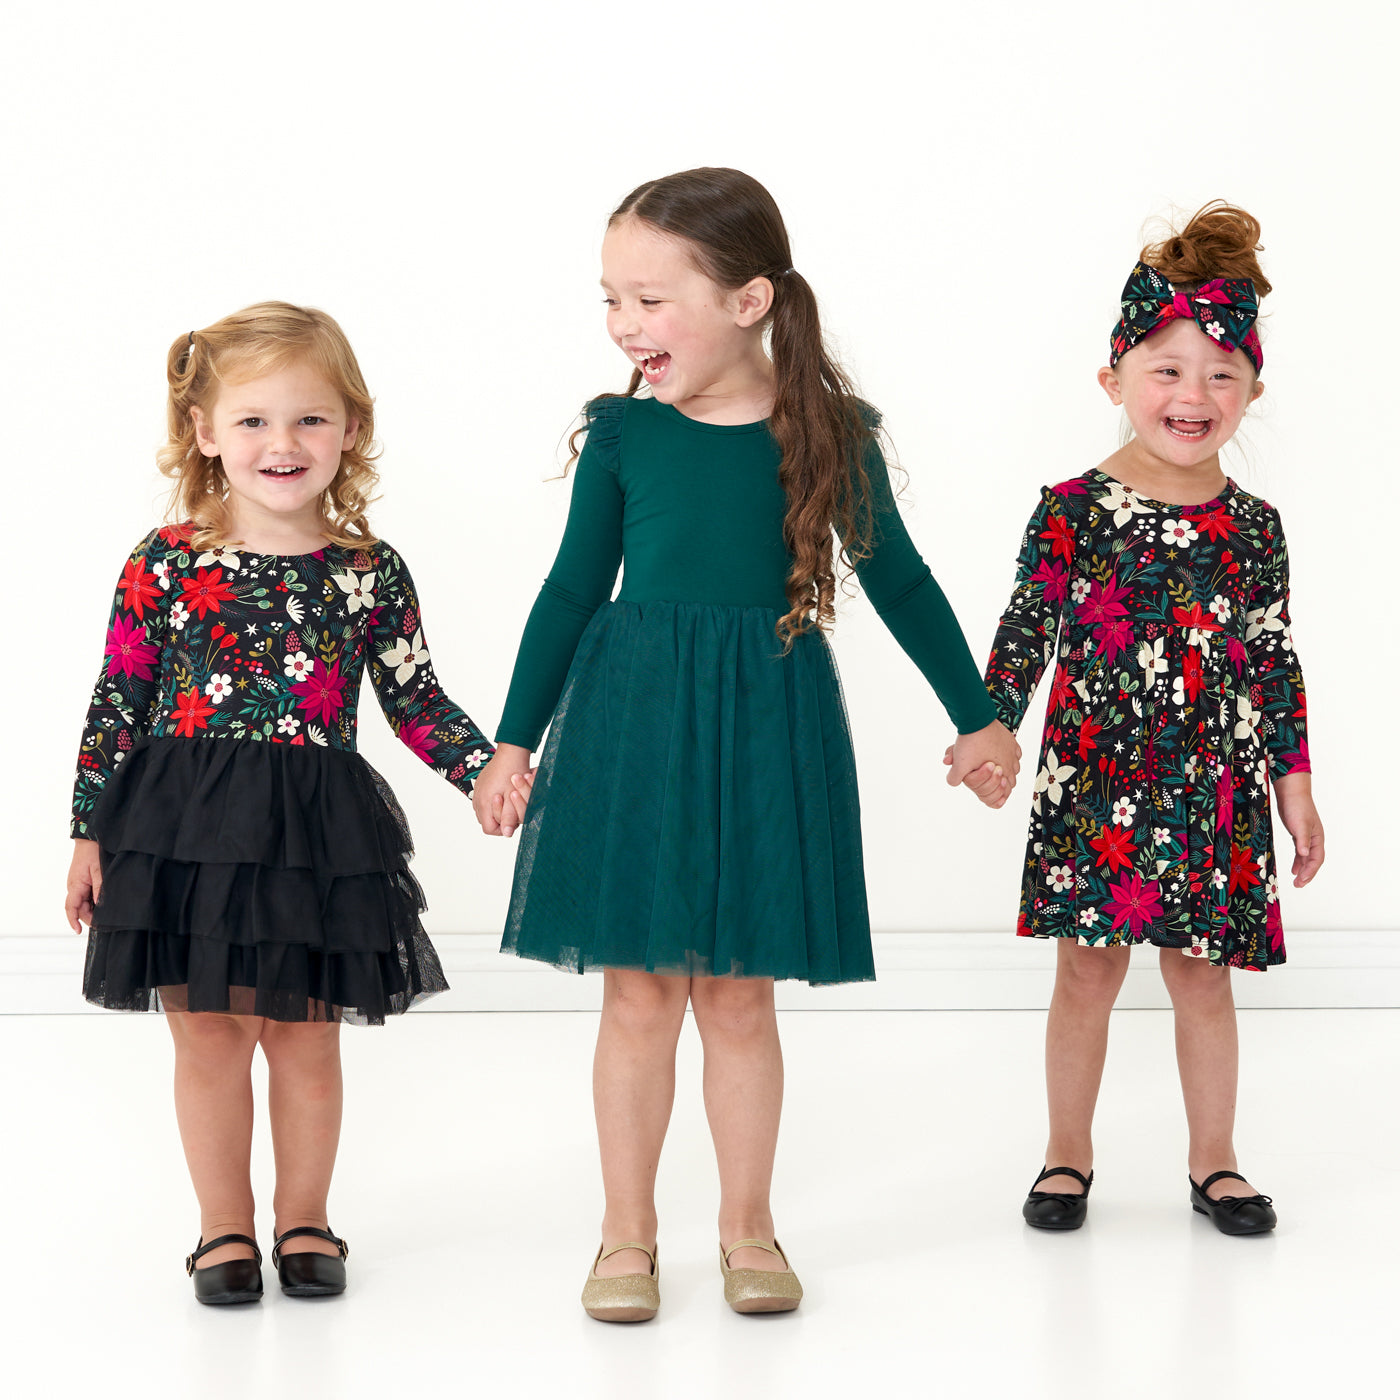 Three children posing together wearing holiday play capsule dresses. One child is wearing an Emerald Flutter tutu dress. Another child is wearing a Berry Merry Flutter Tutu Dress with bloomer. The last child is wearing a Merry Berry twirl dress with bodysuit paired with a matching Berry Merry luxe bow headband